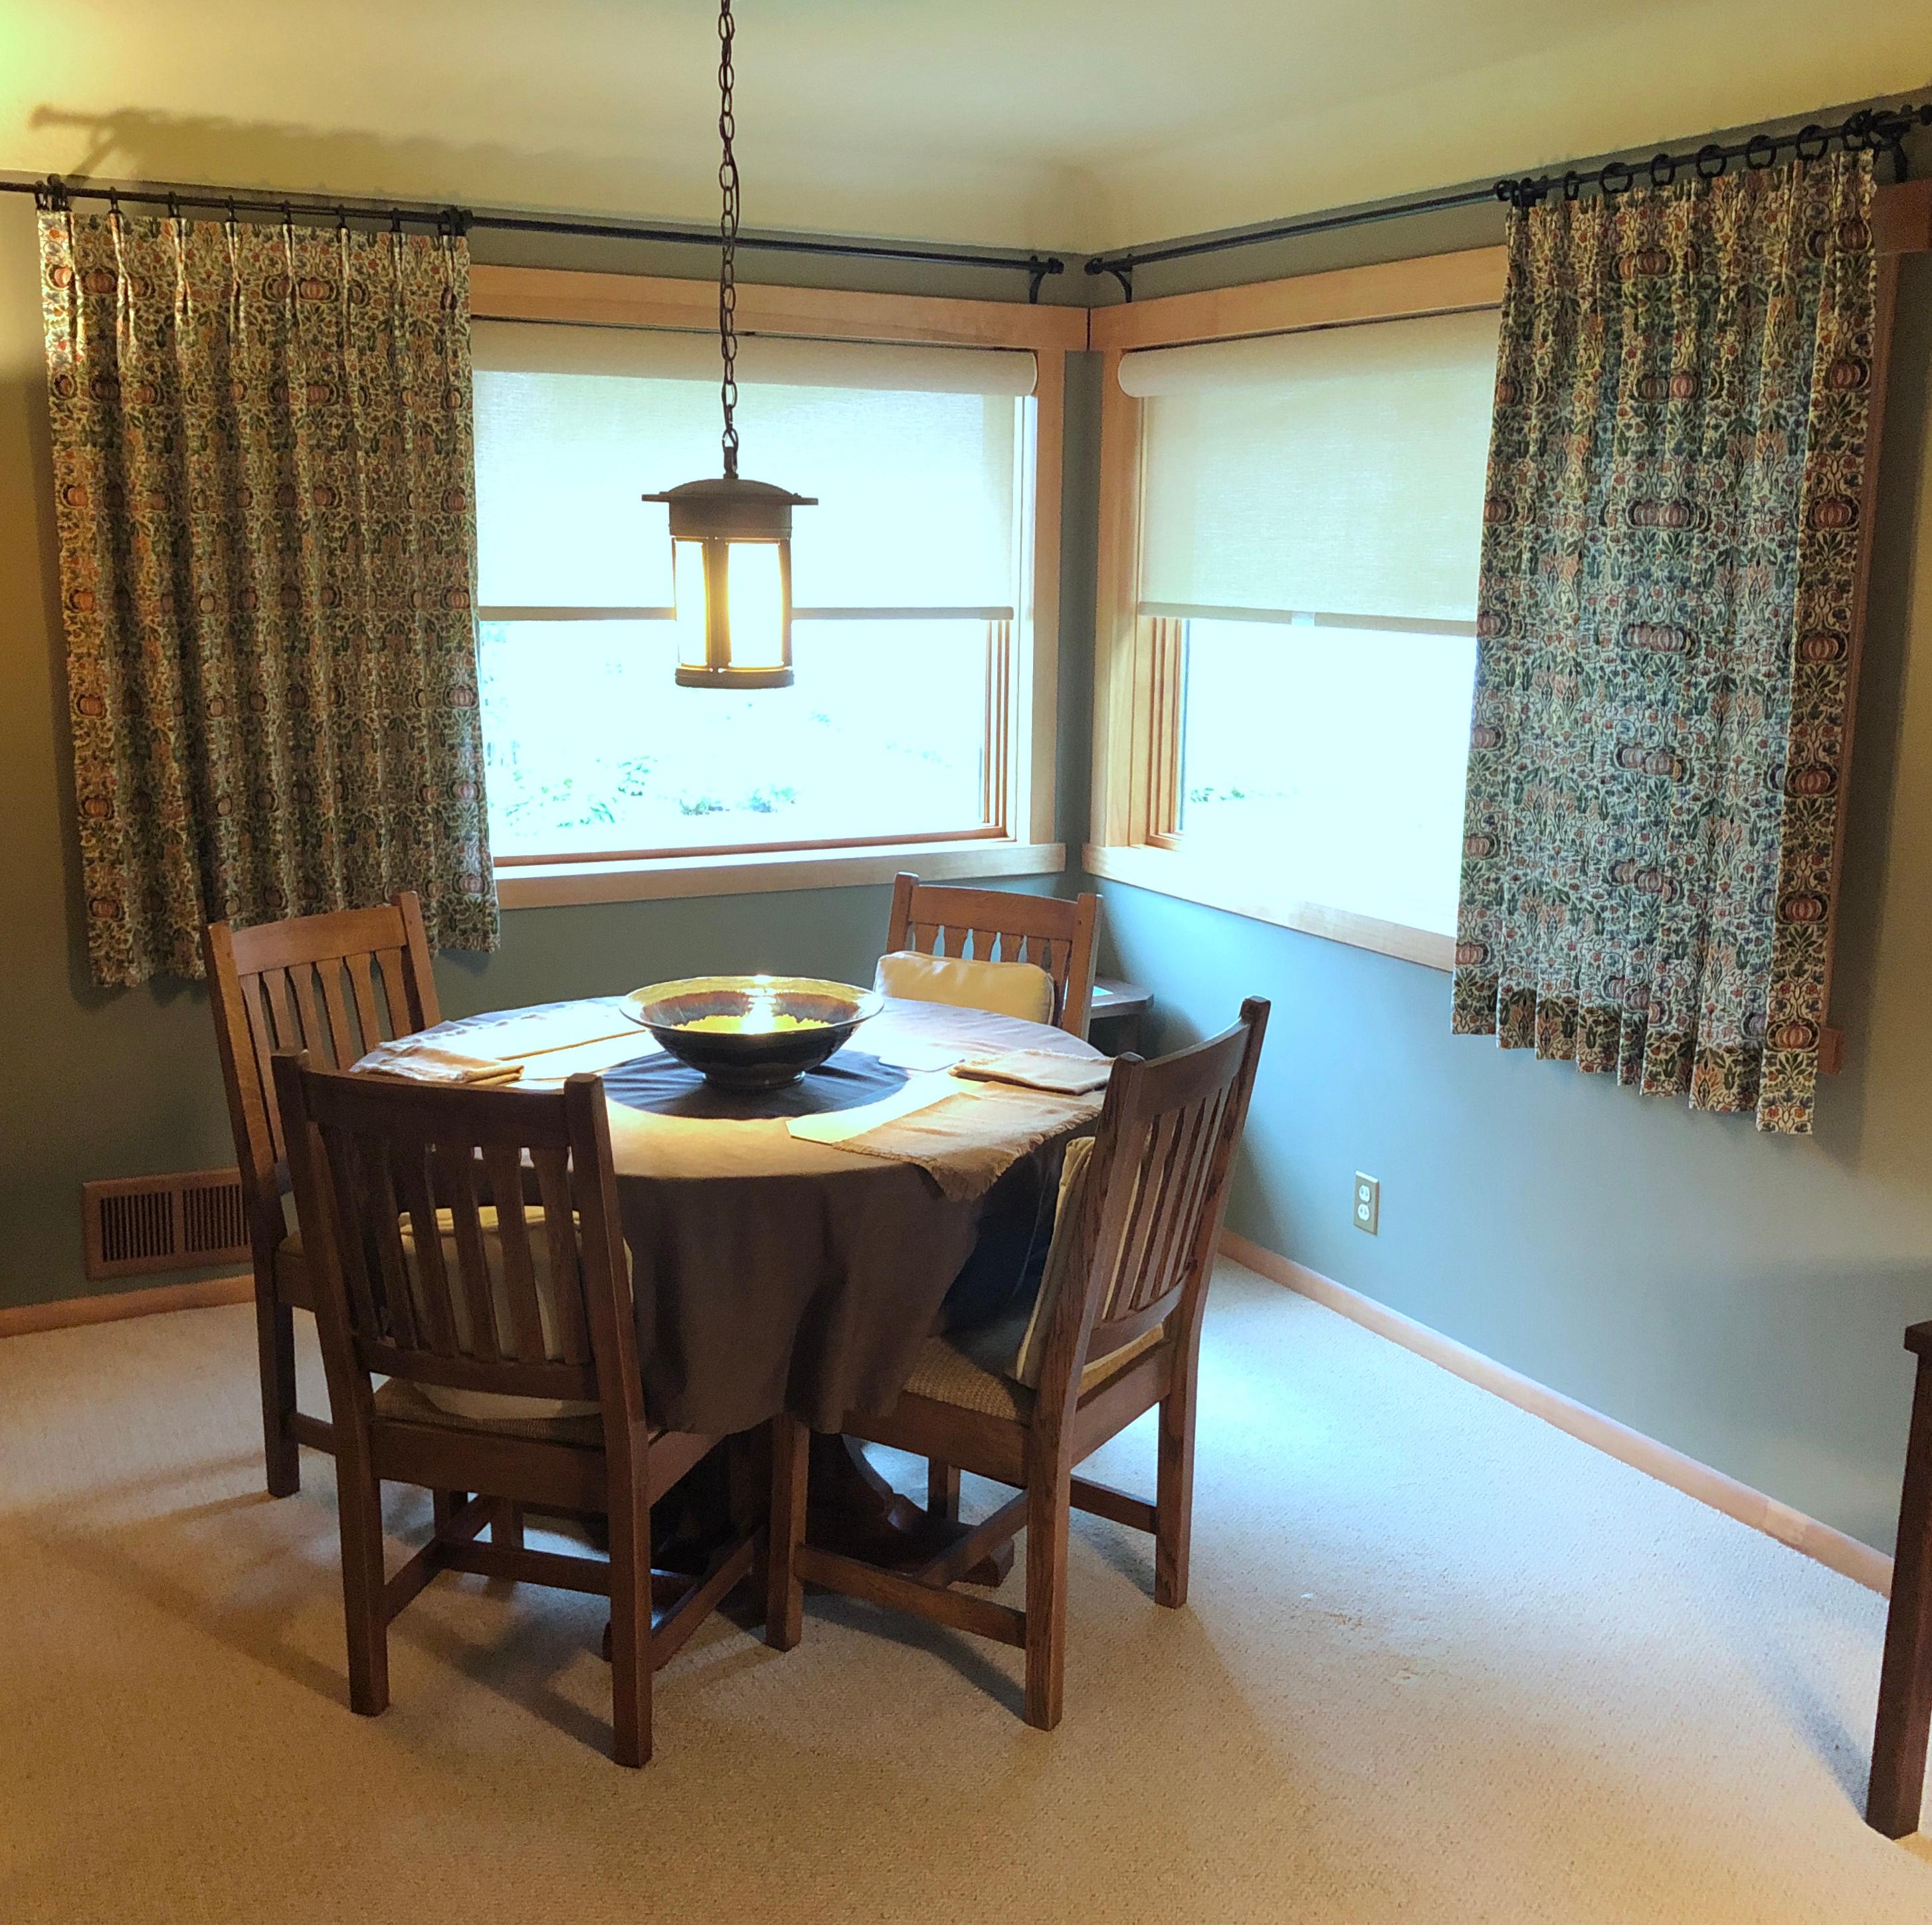 We helped this homeowner in Glencoe with custom drapes to complement his mid-century modern style.